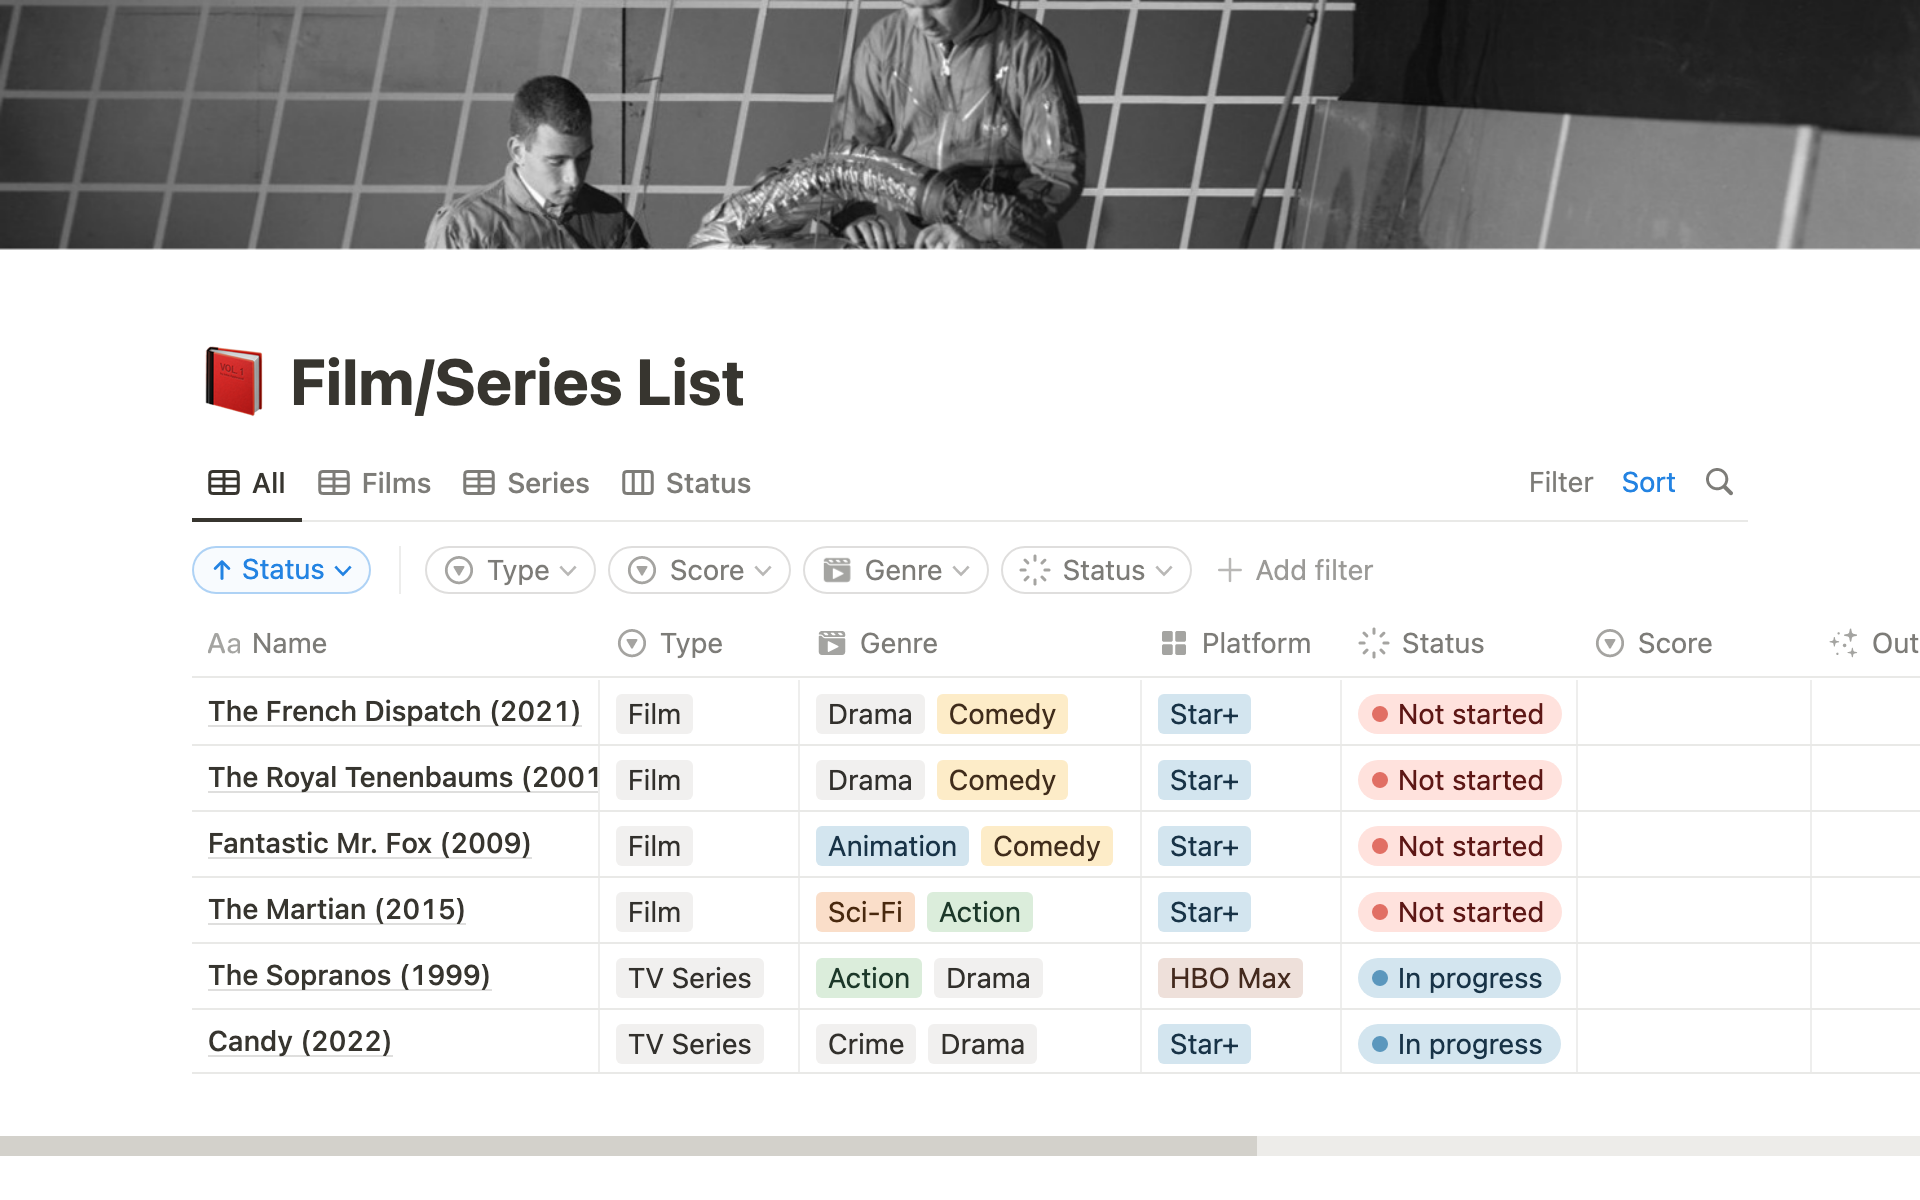 Allows to make a wishlist of TV series & films.